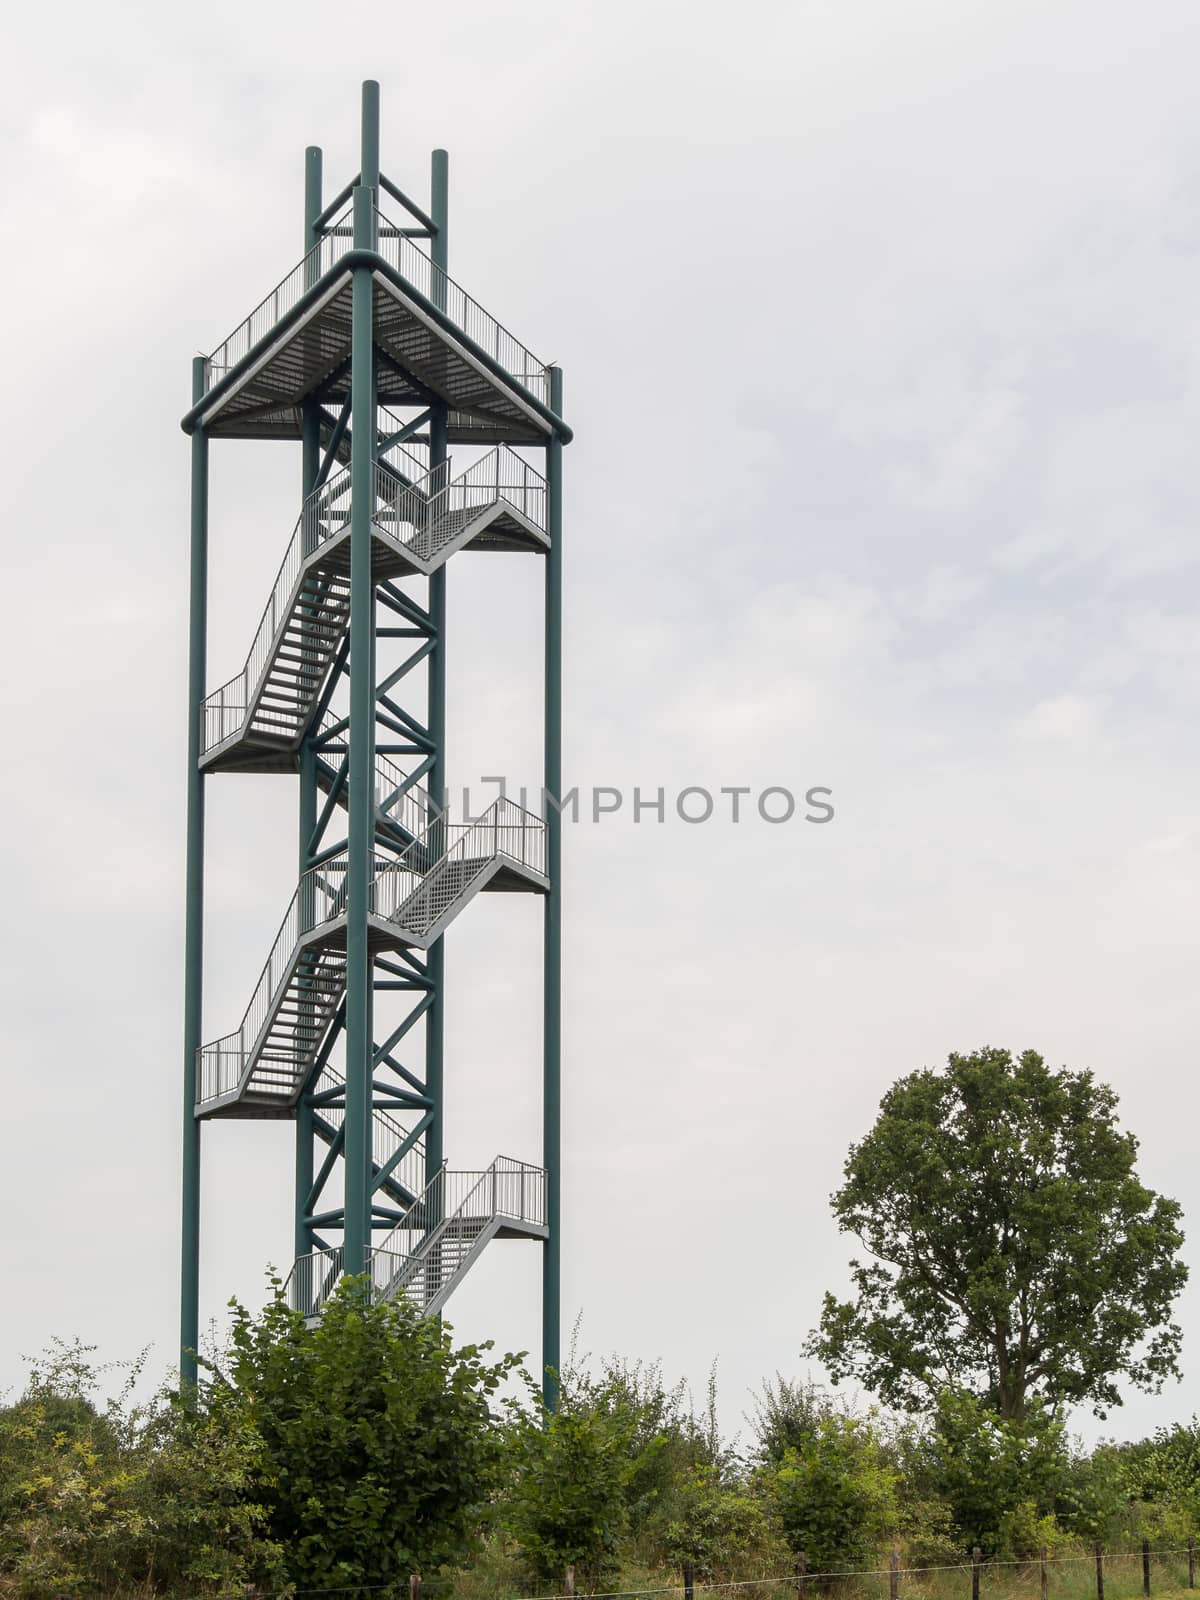 Tall metal lookout tower in Steenwijk in the Netherlands